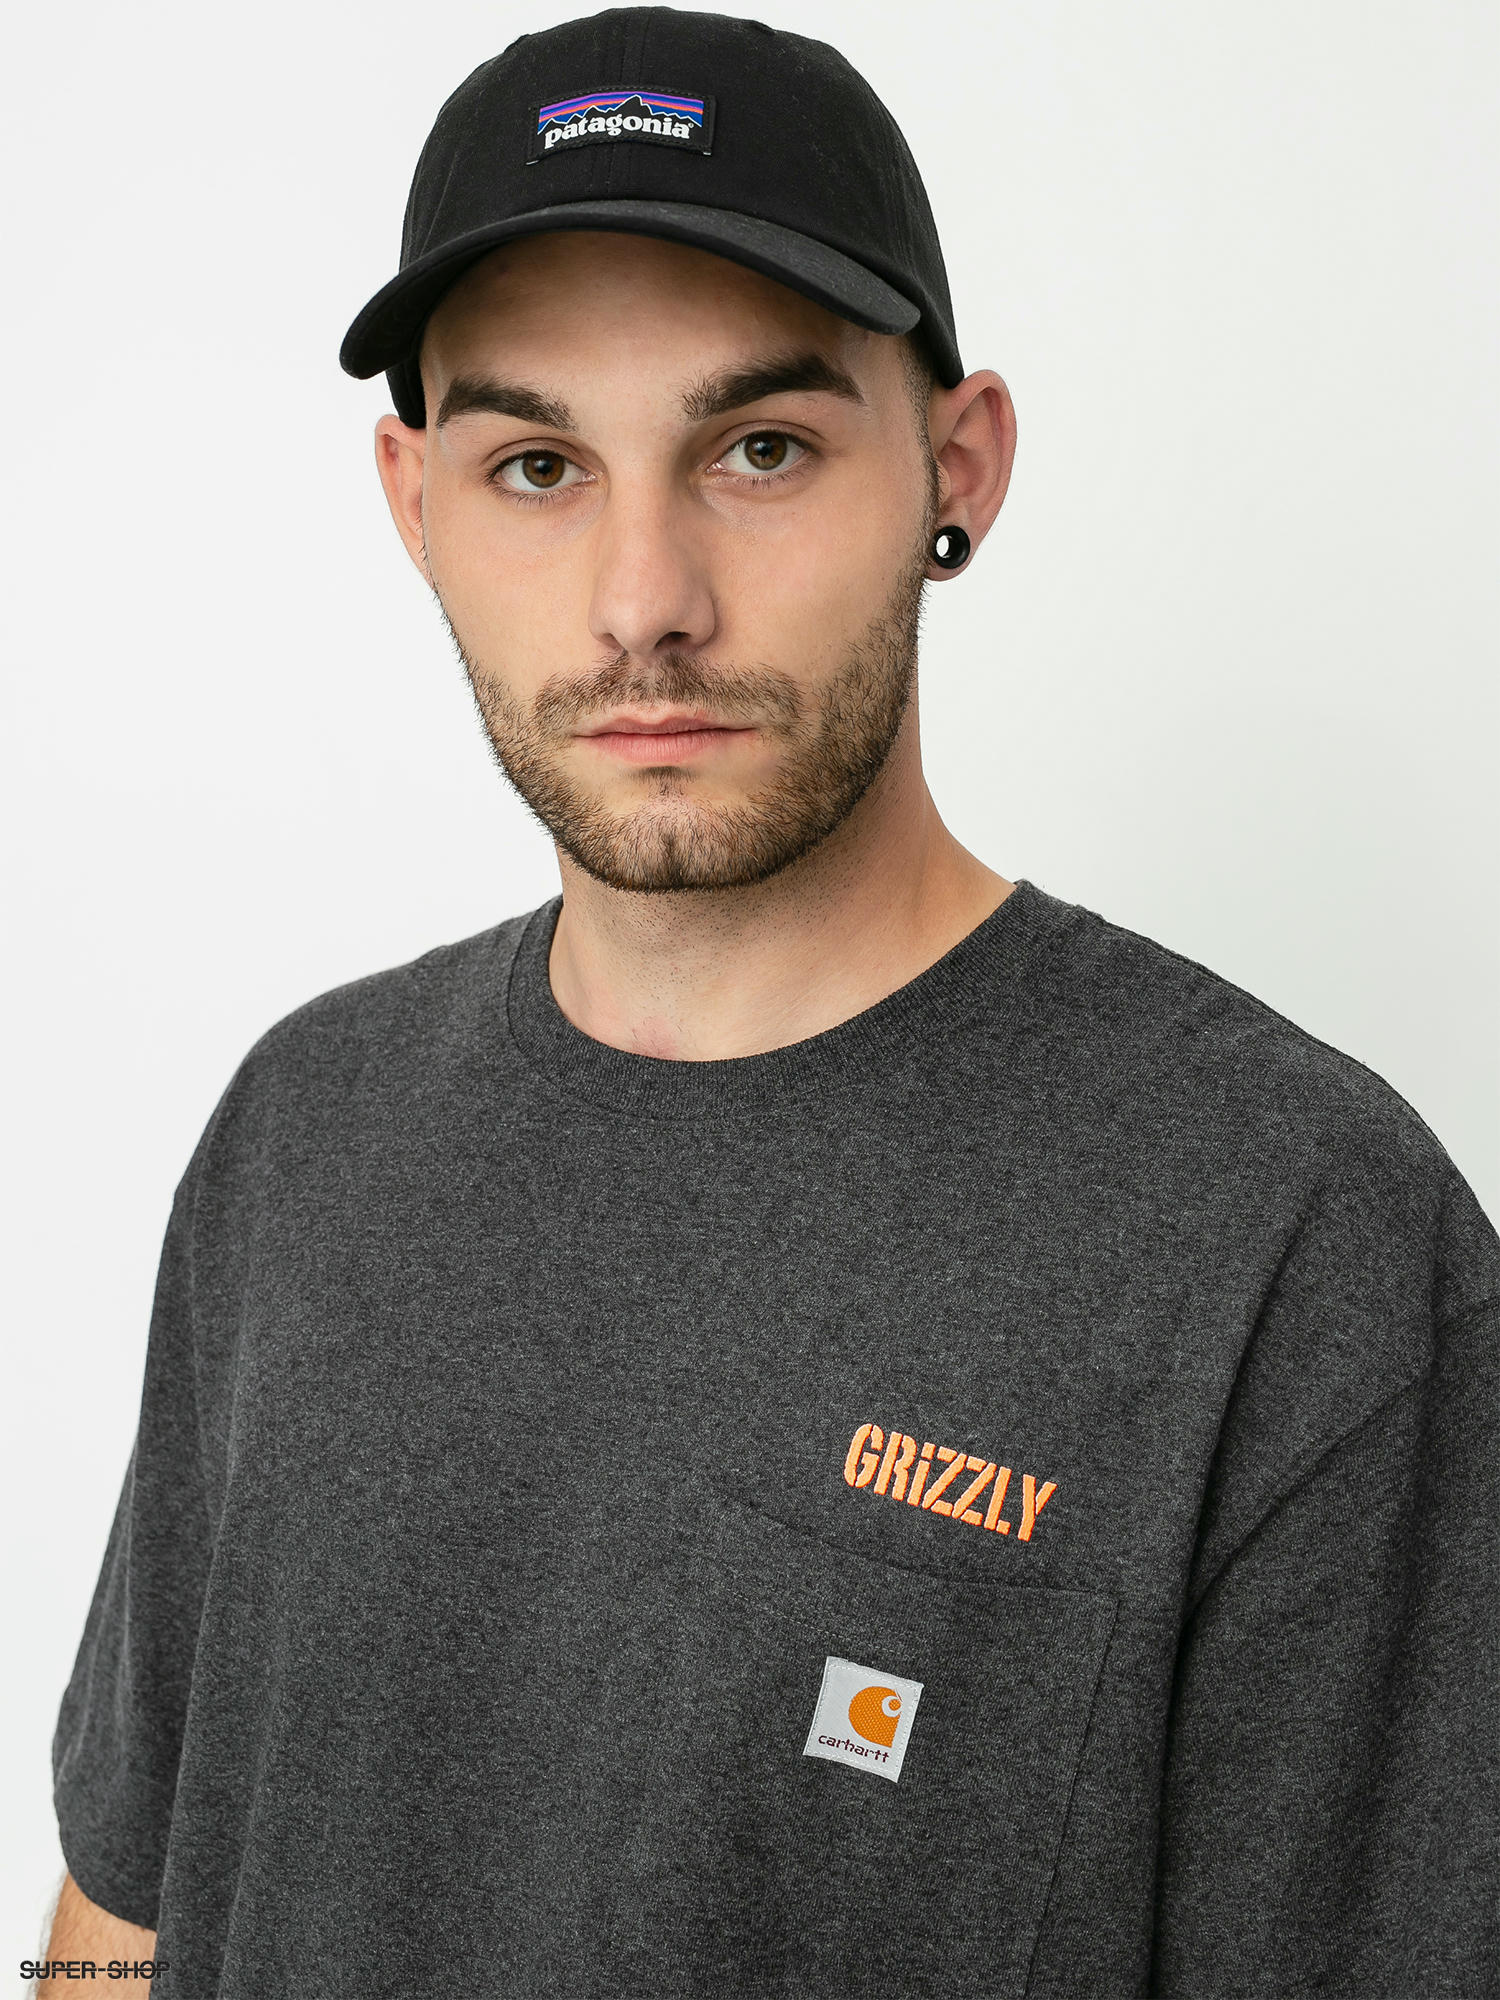 Niende blandt Oh Grizzly Griptape X Carhartt Stamp Work Pocket T-shirt (heather charcoal)